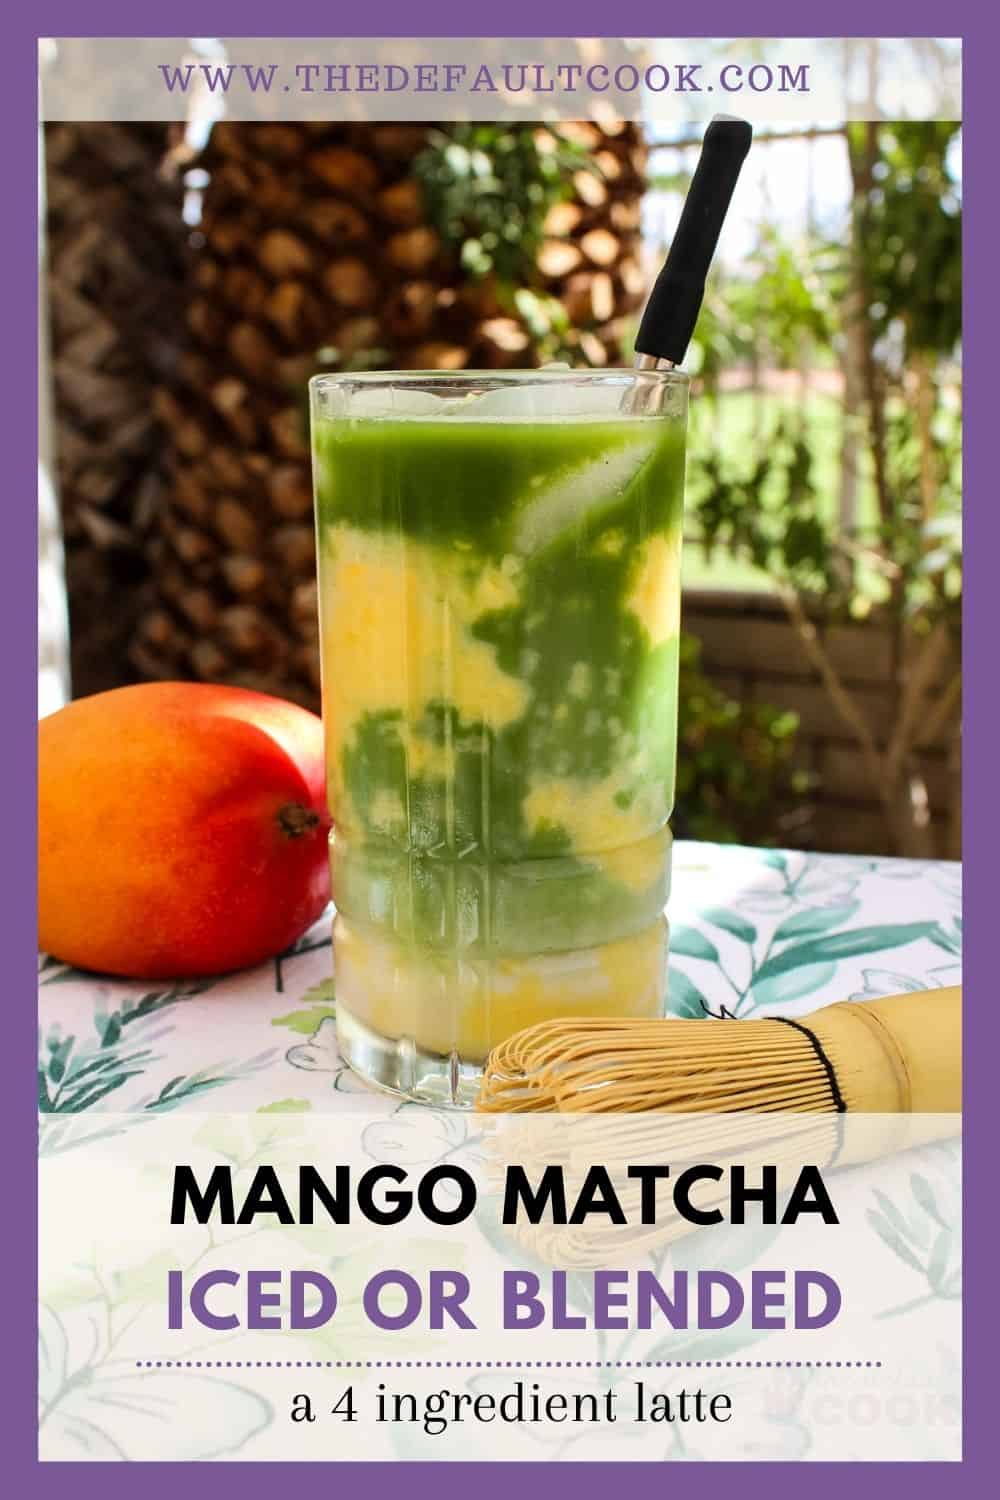 Glass of mango matcha surrounded by a mango and matcha whisk outdoors.